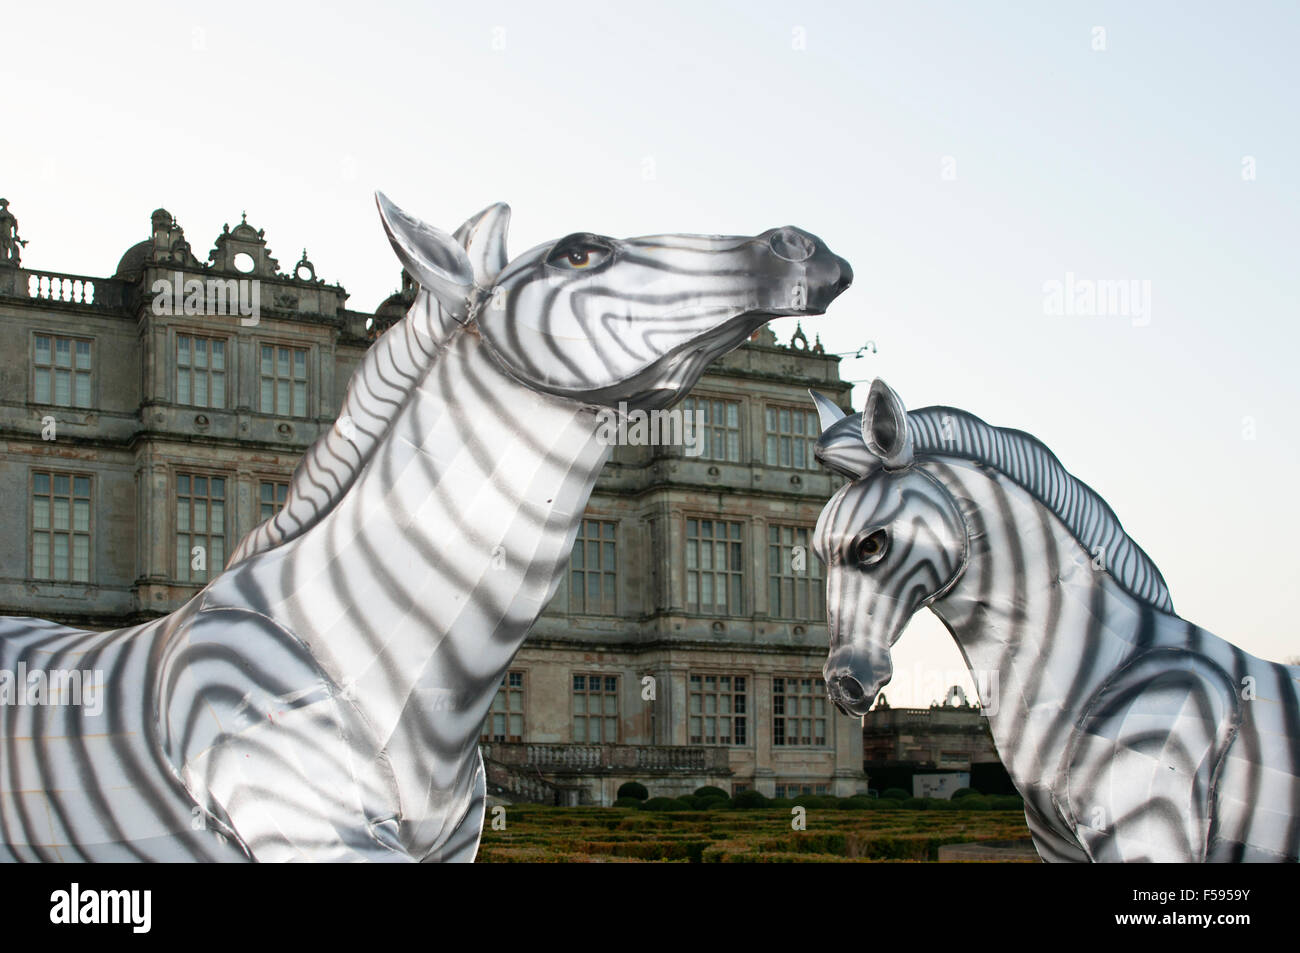 Elaborate Chinese lanterns on display for the 2014 Festival of Light at Longleat, Wiltshire, UK Stock Photo